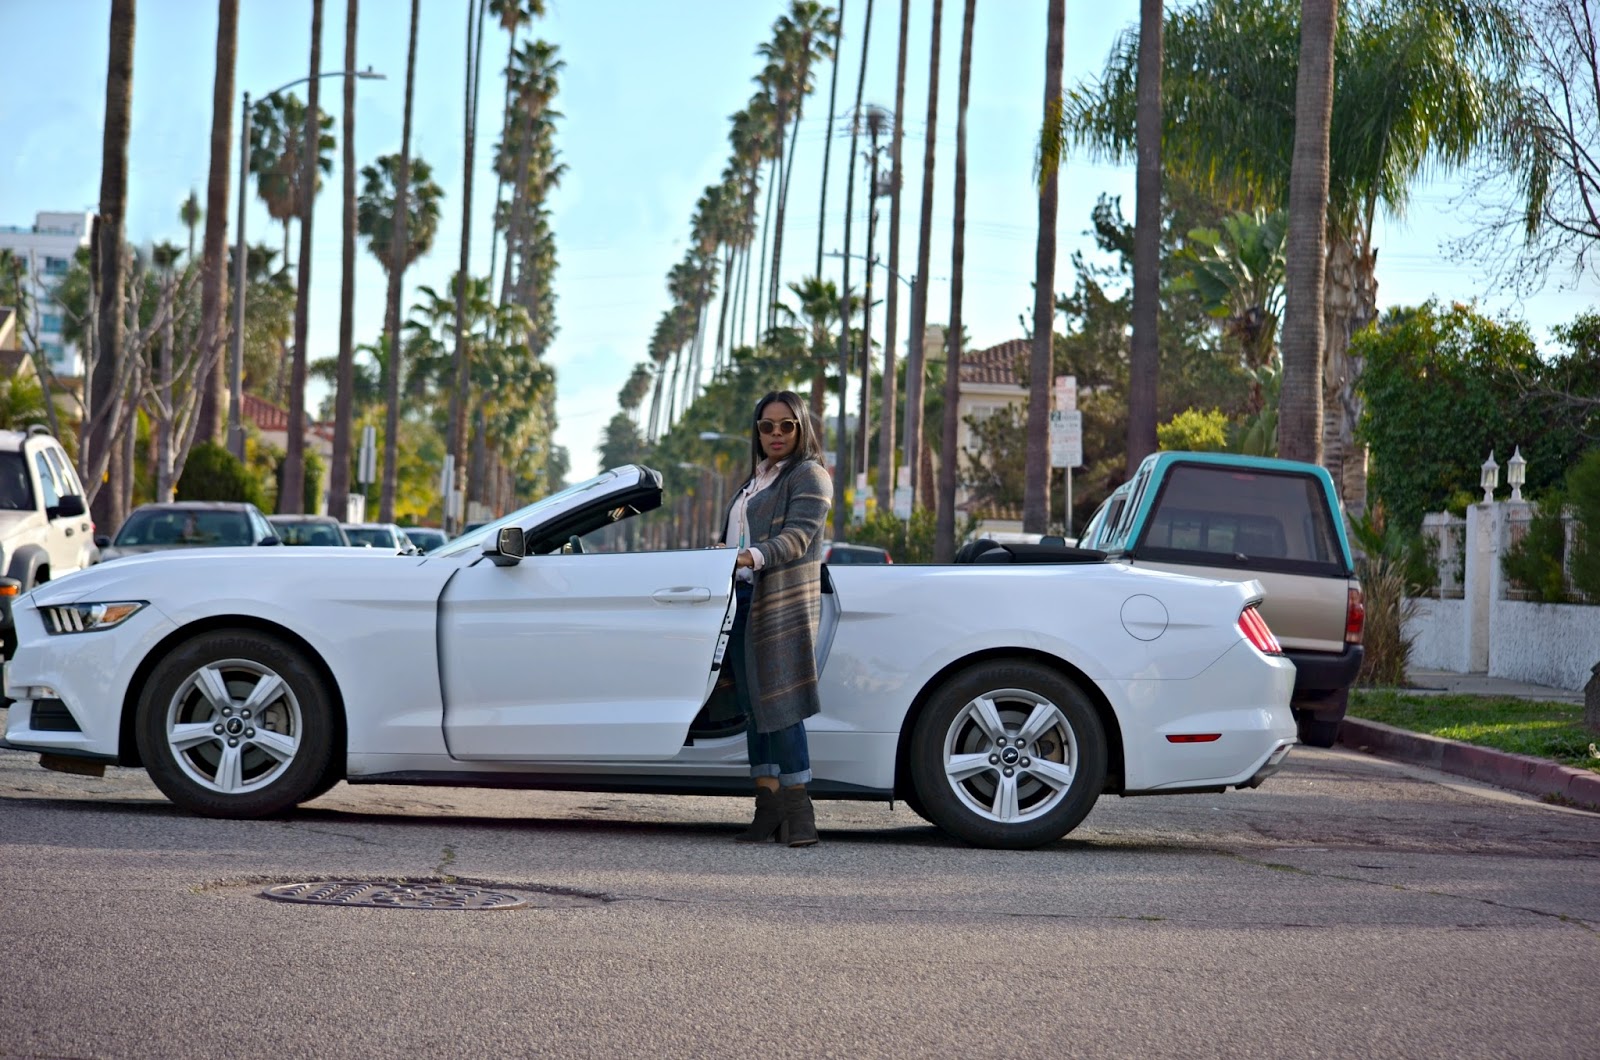 Los Angeles Palms Lined Street in A Convertible Mustang Listening To Mary J. Blige